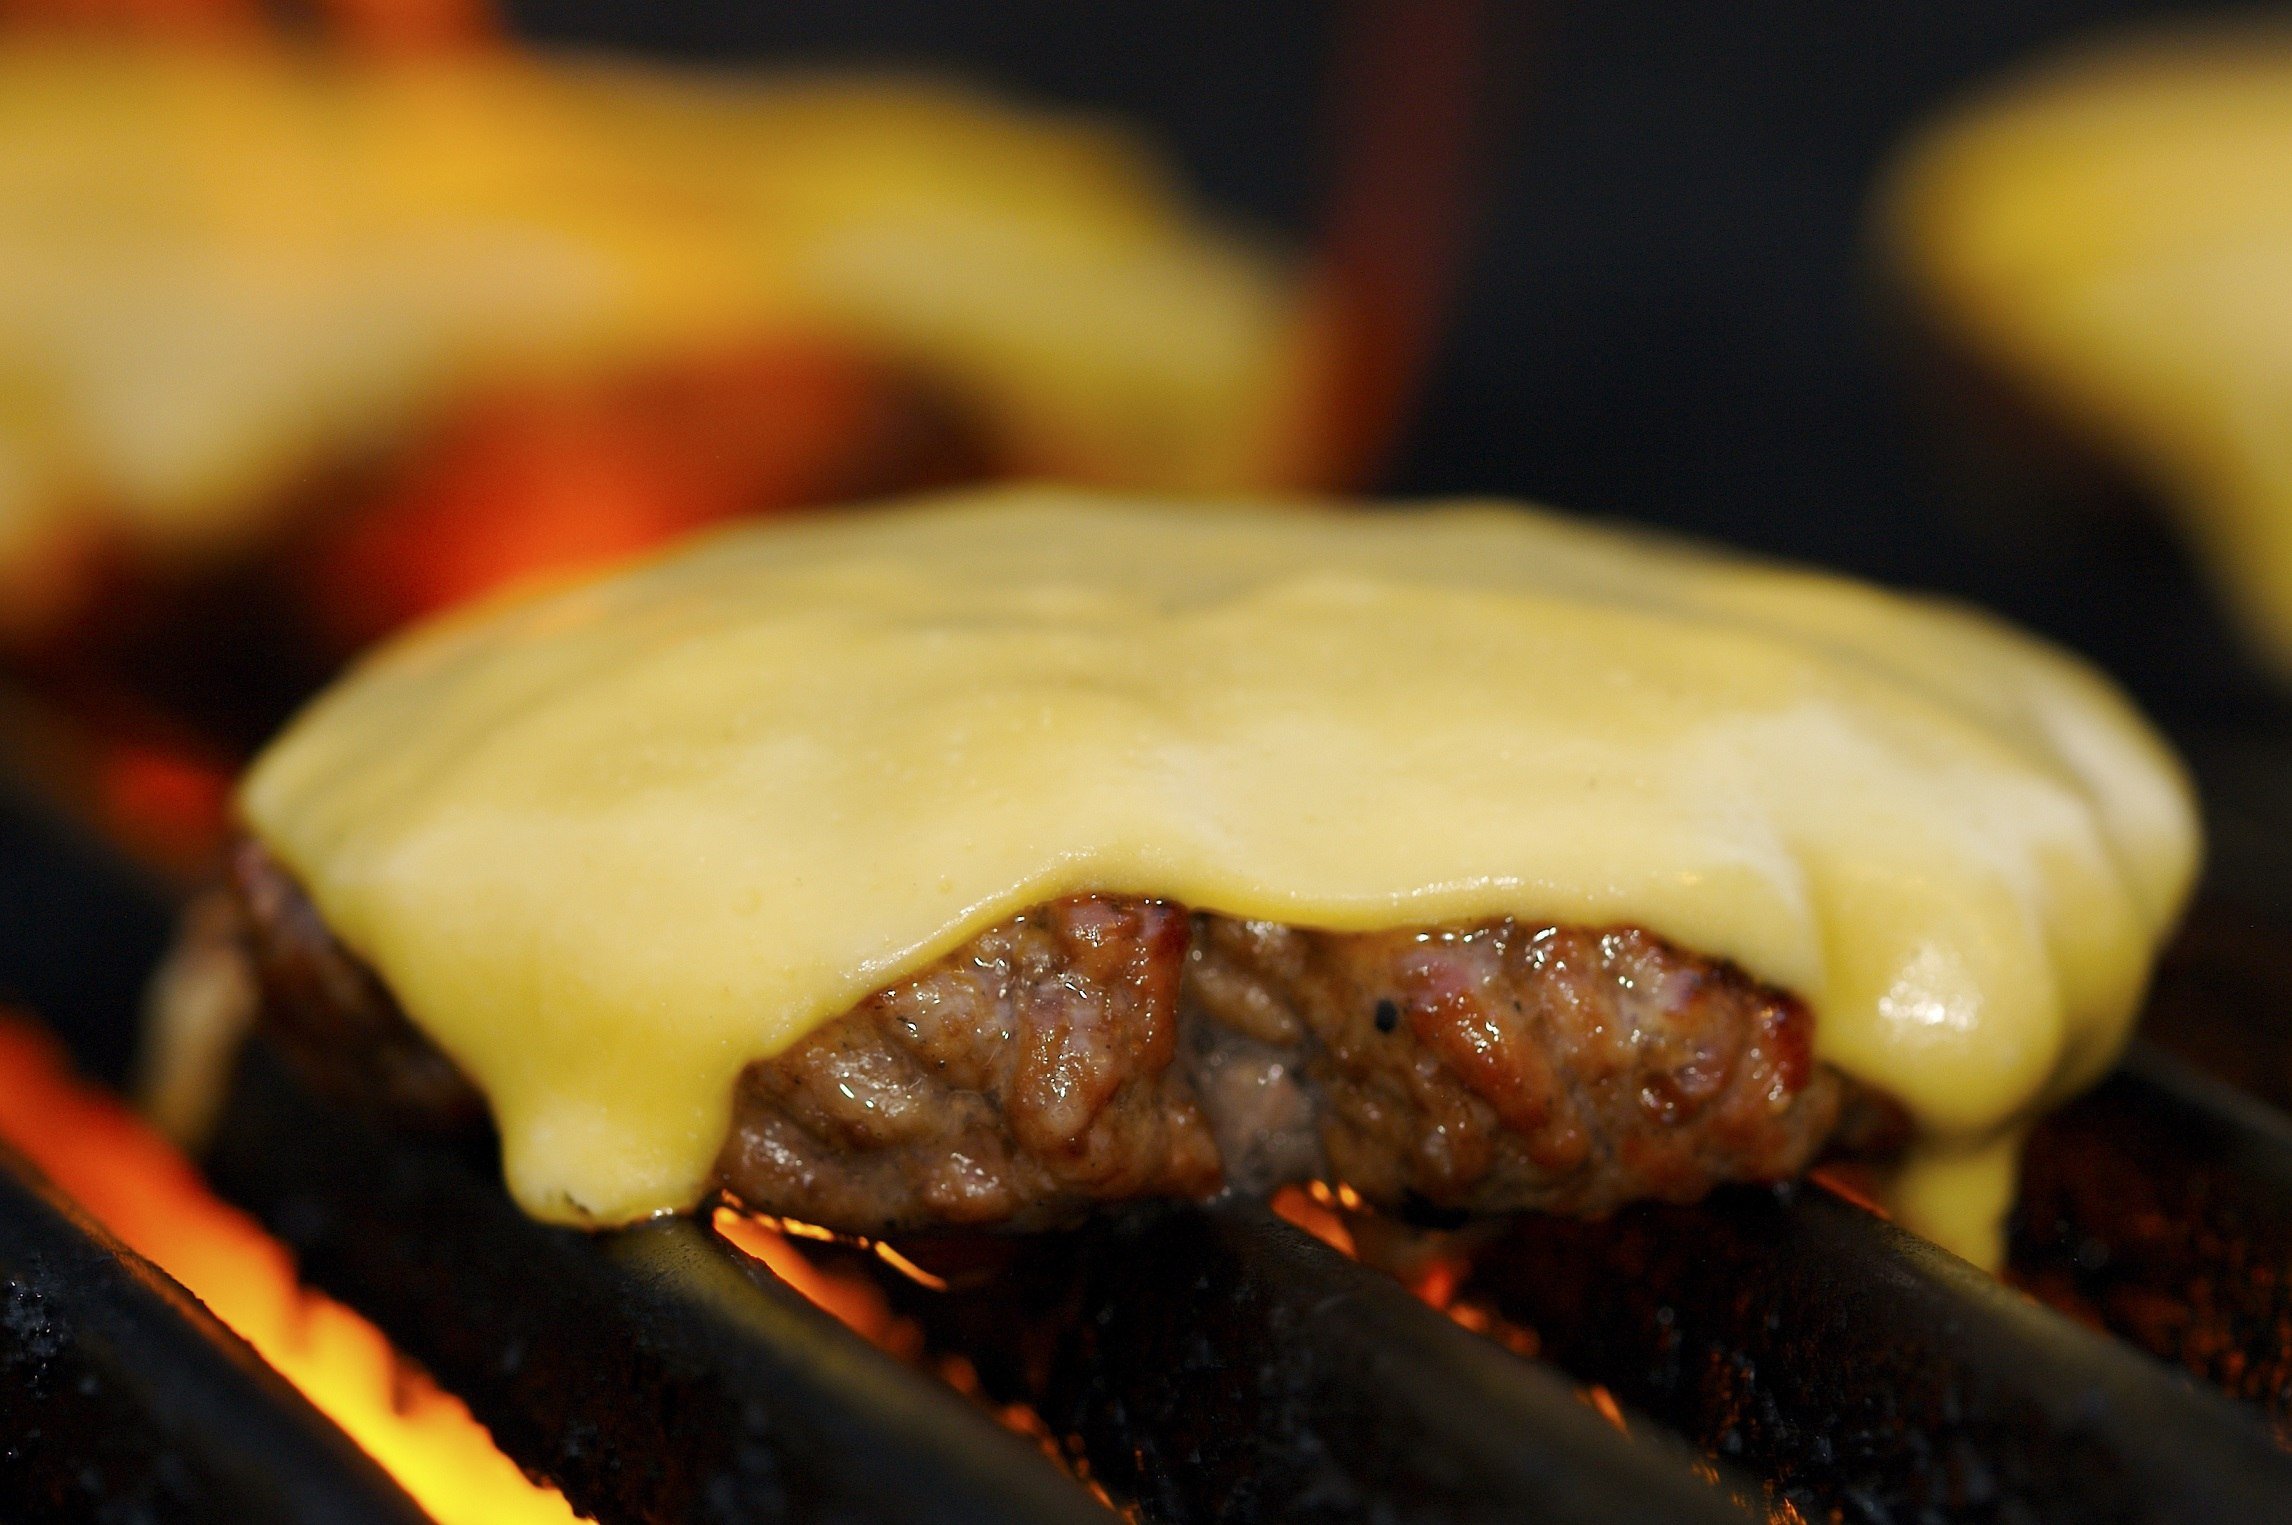 Cheeseburger on the grill